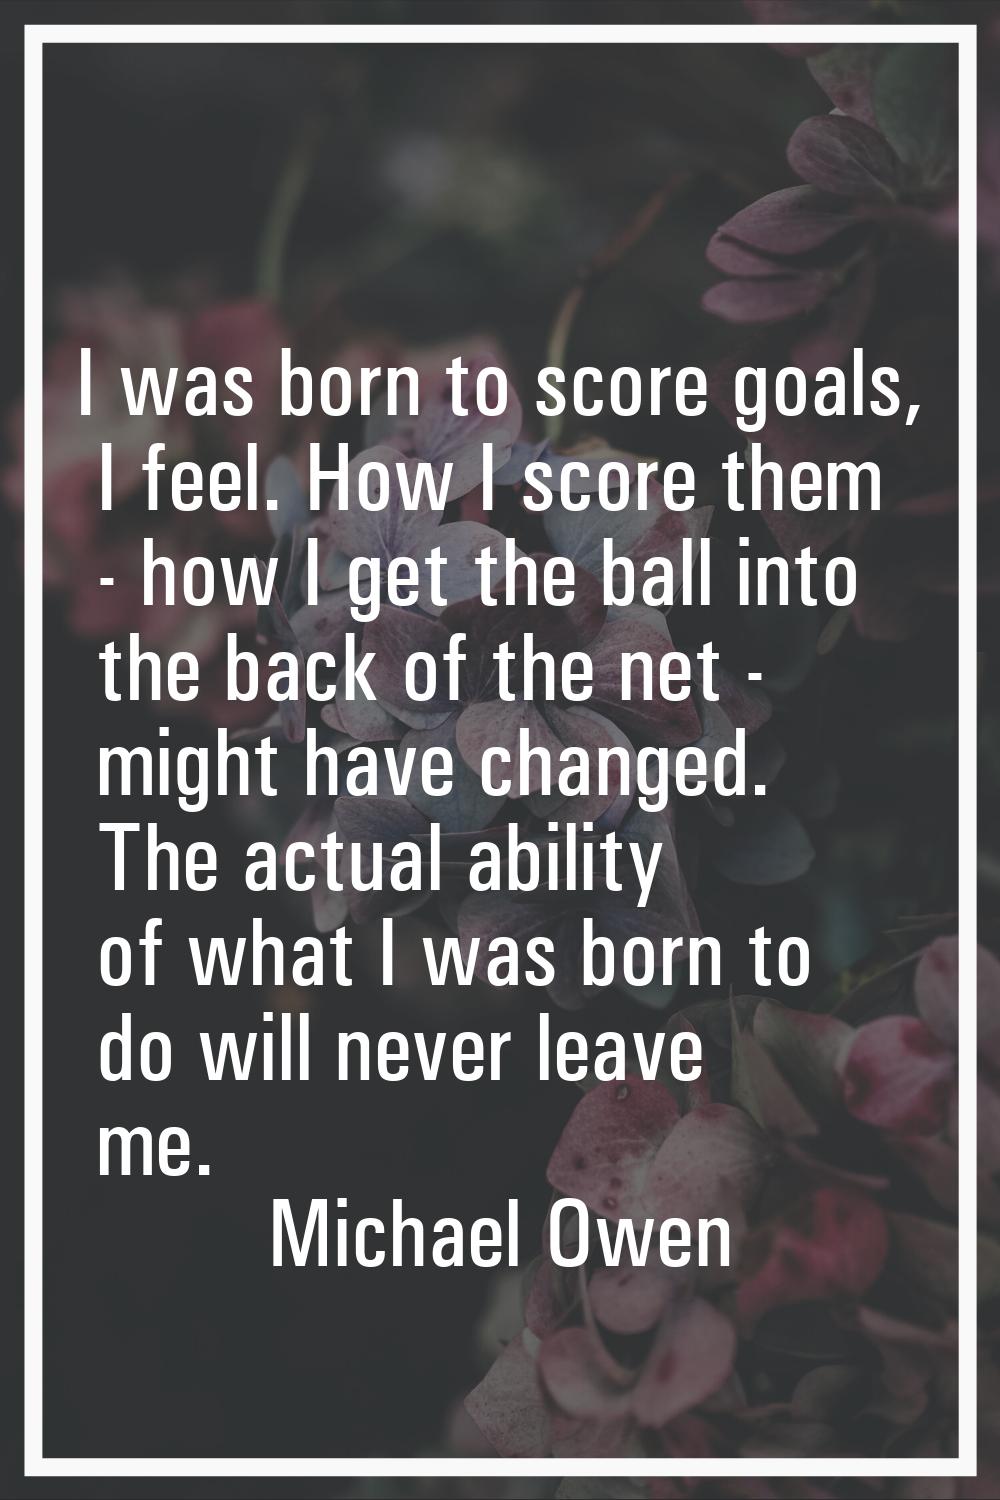 I was born to score goals, I feel. How I score them - how I get the ball into the back of the net -